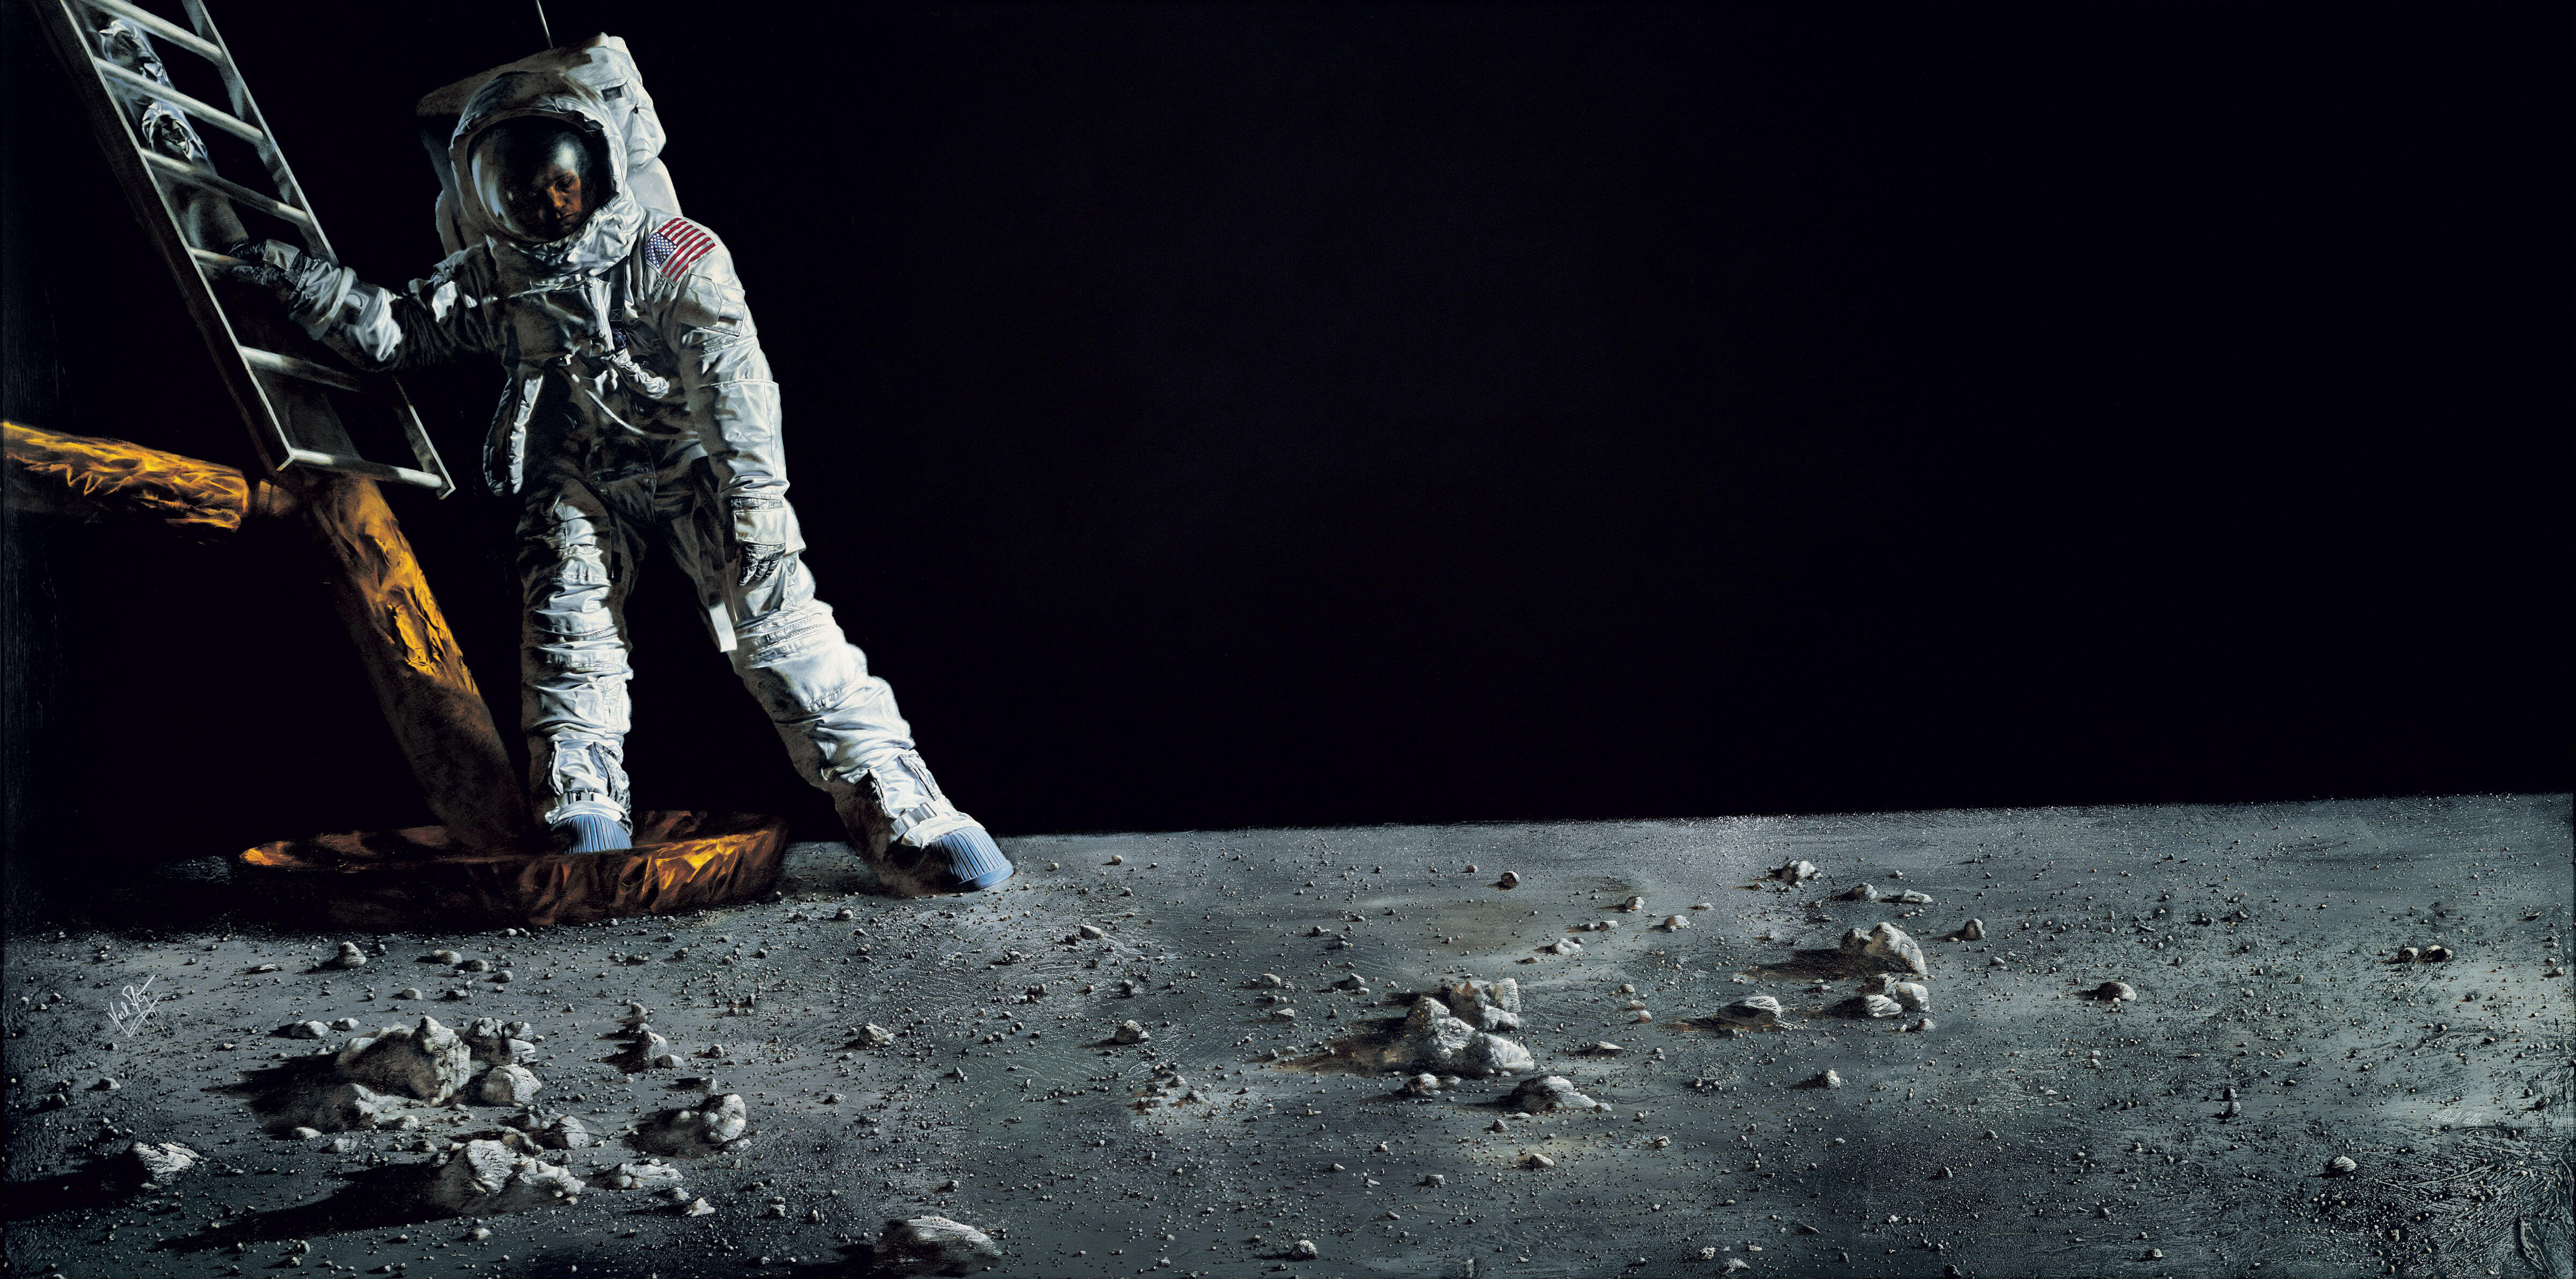 Astronaut stepping on to the moon